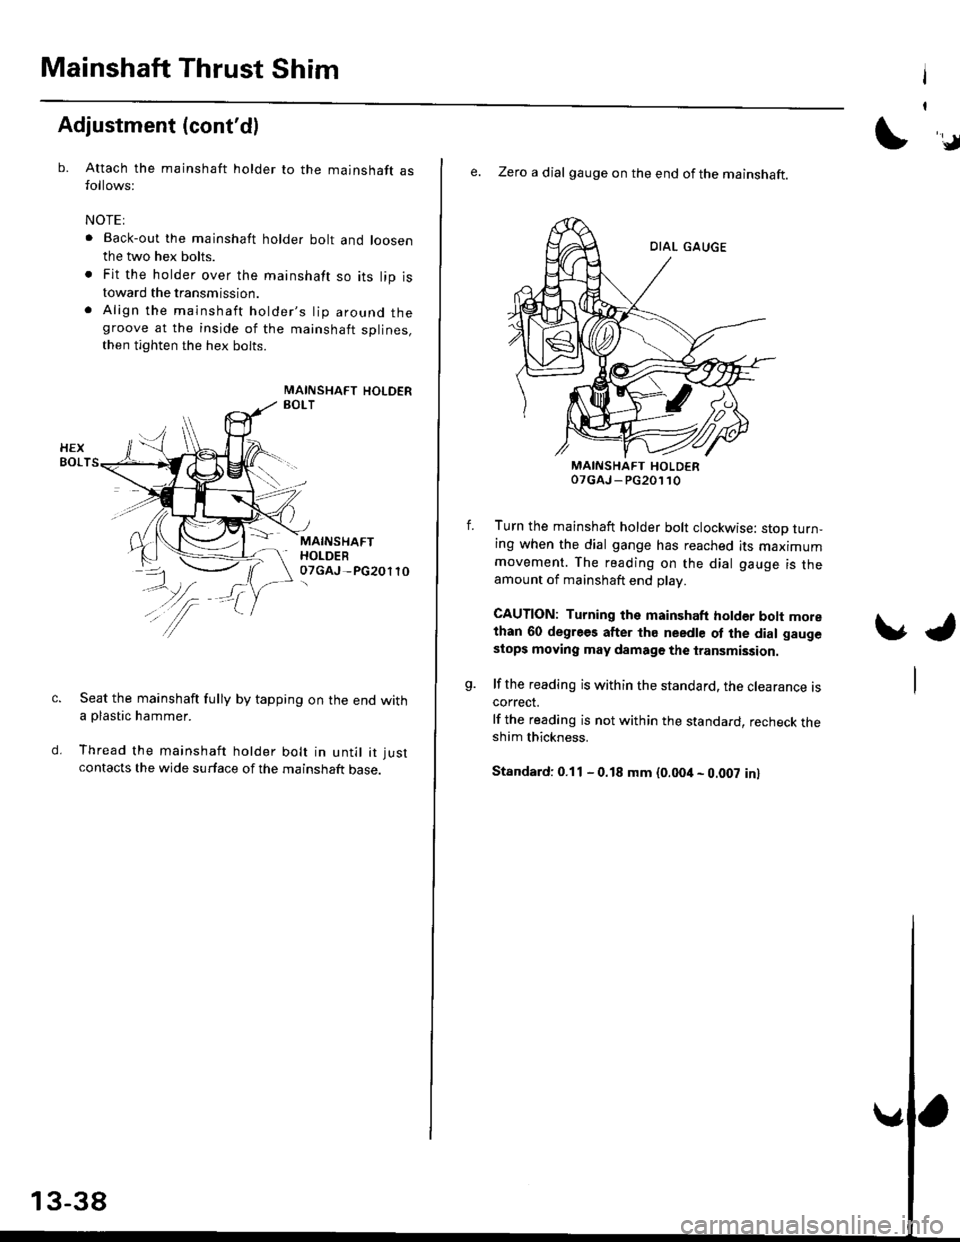 HONDA CIVIC 1996 6.G Owners Manual Mainshaft Thrust ShimI
I
Adjustment (contdl
b.Attach the mainshaft holder to the mainshaft asfollows:
NOTEI
. Back-out the mainshaft holder bolt and loosen
the two hex bolts.
. Fit the holder over th